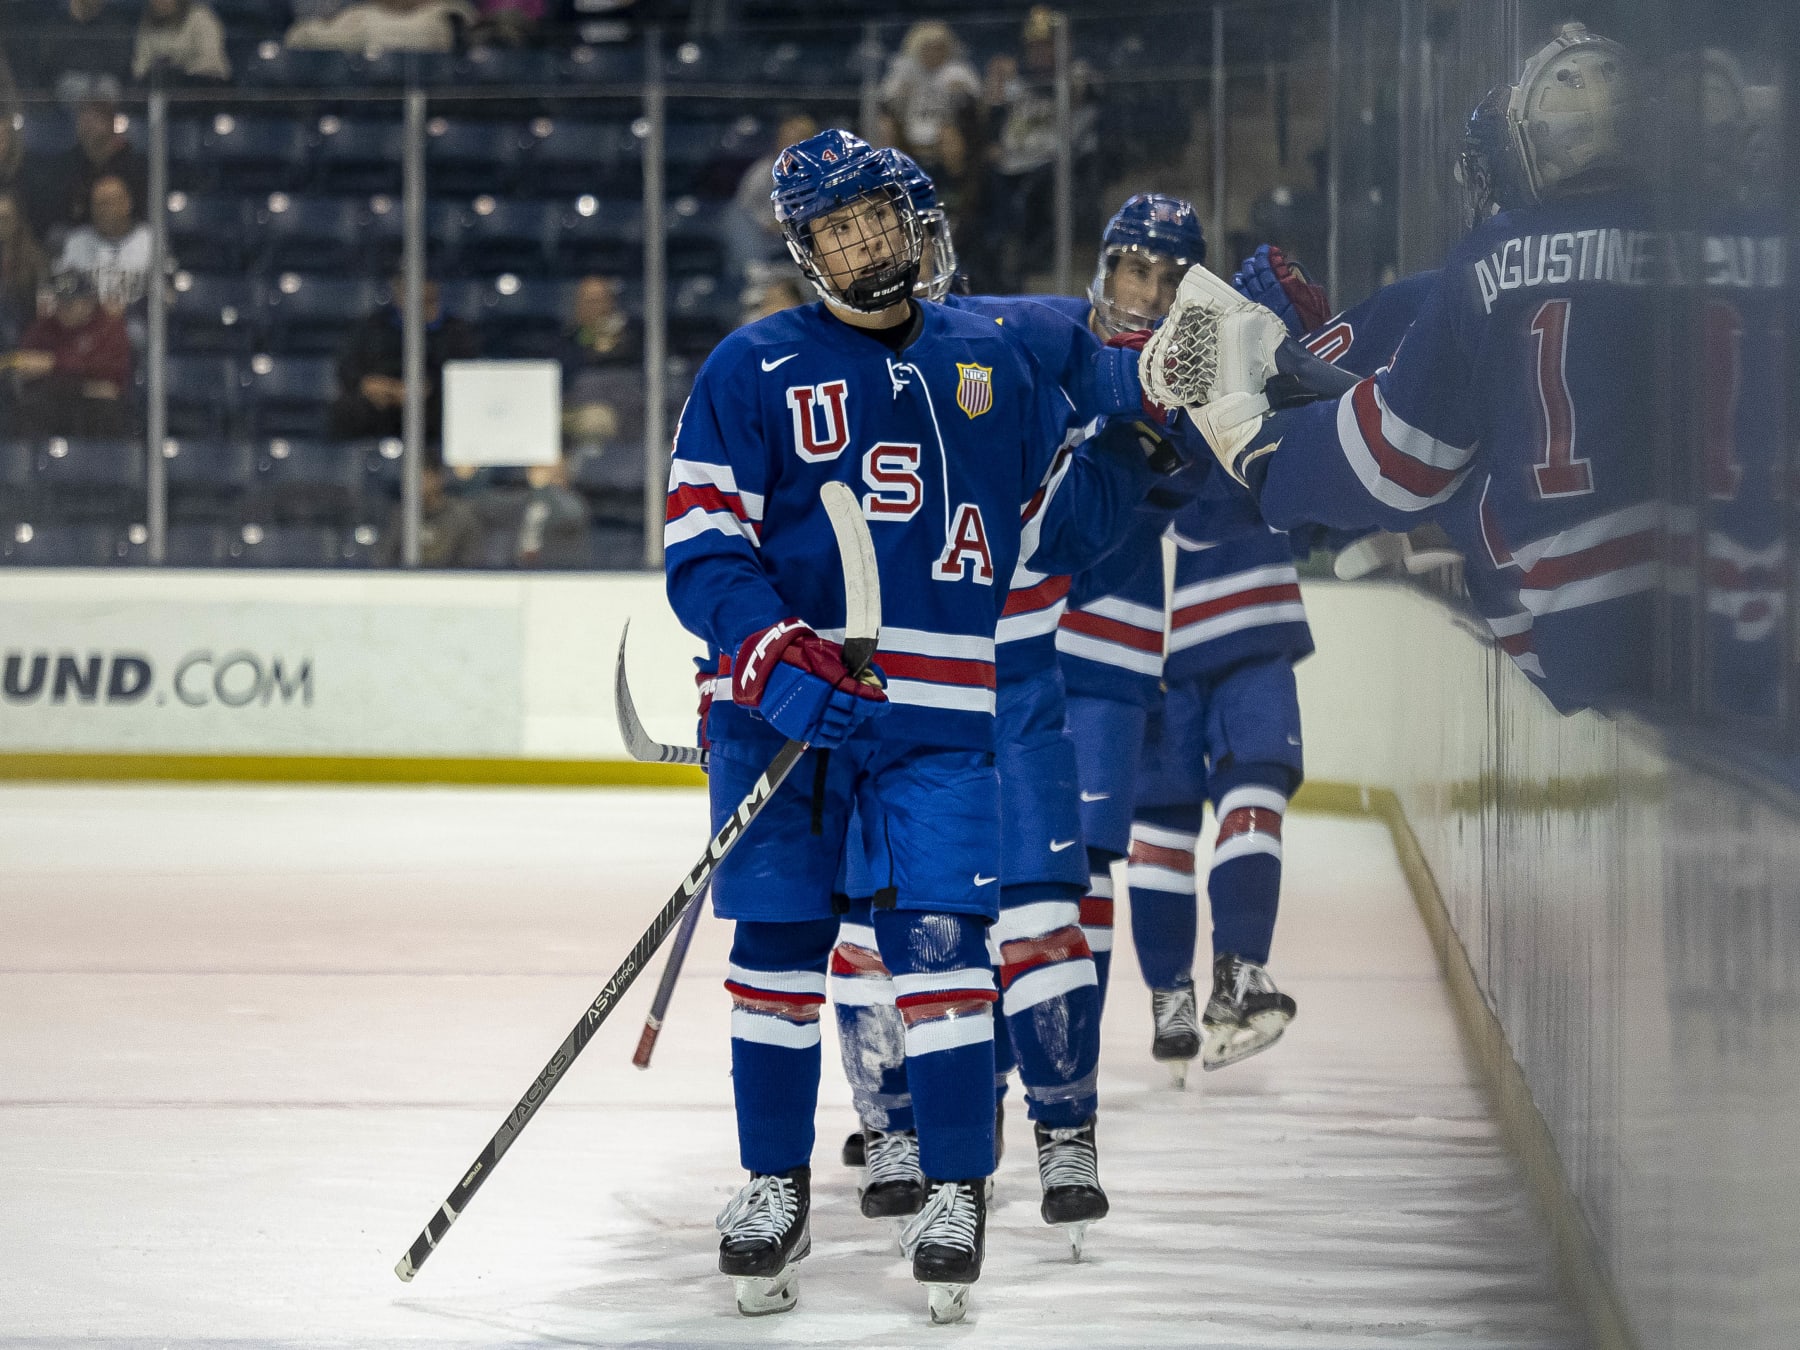 Jack Hughes and Ryan St. Louis Named to 2021 U.S. Under-18 Team